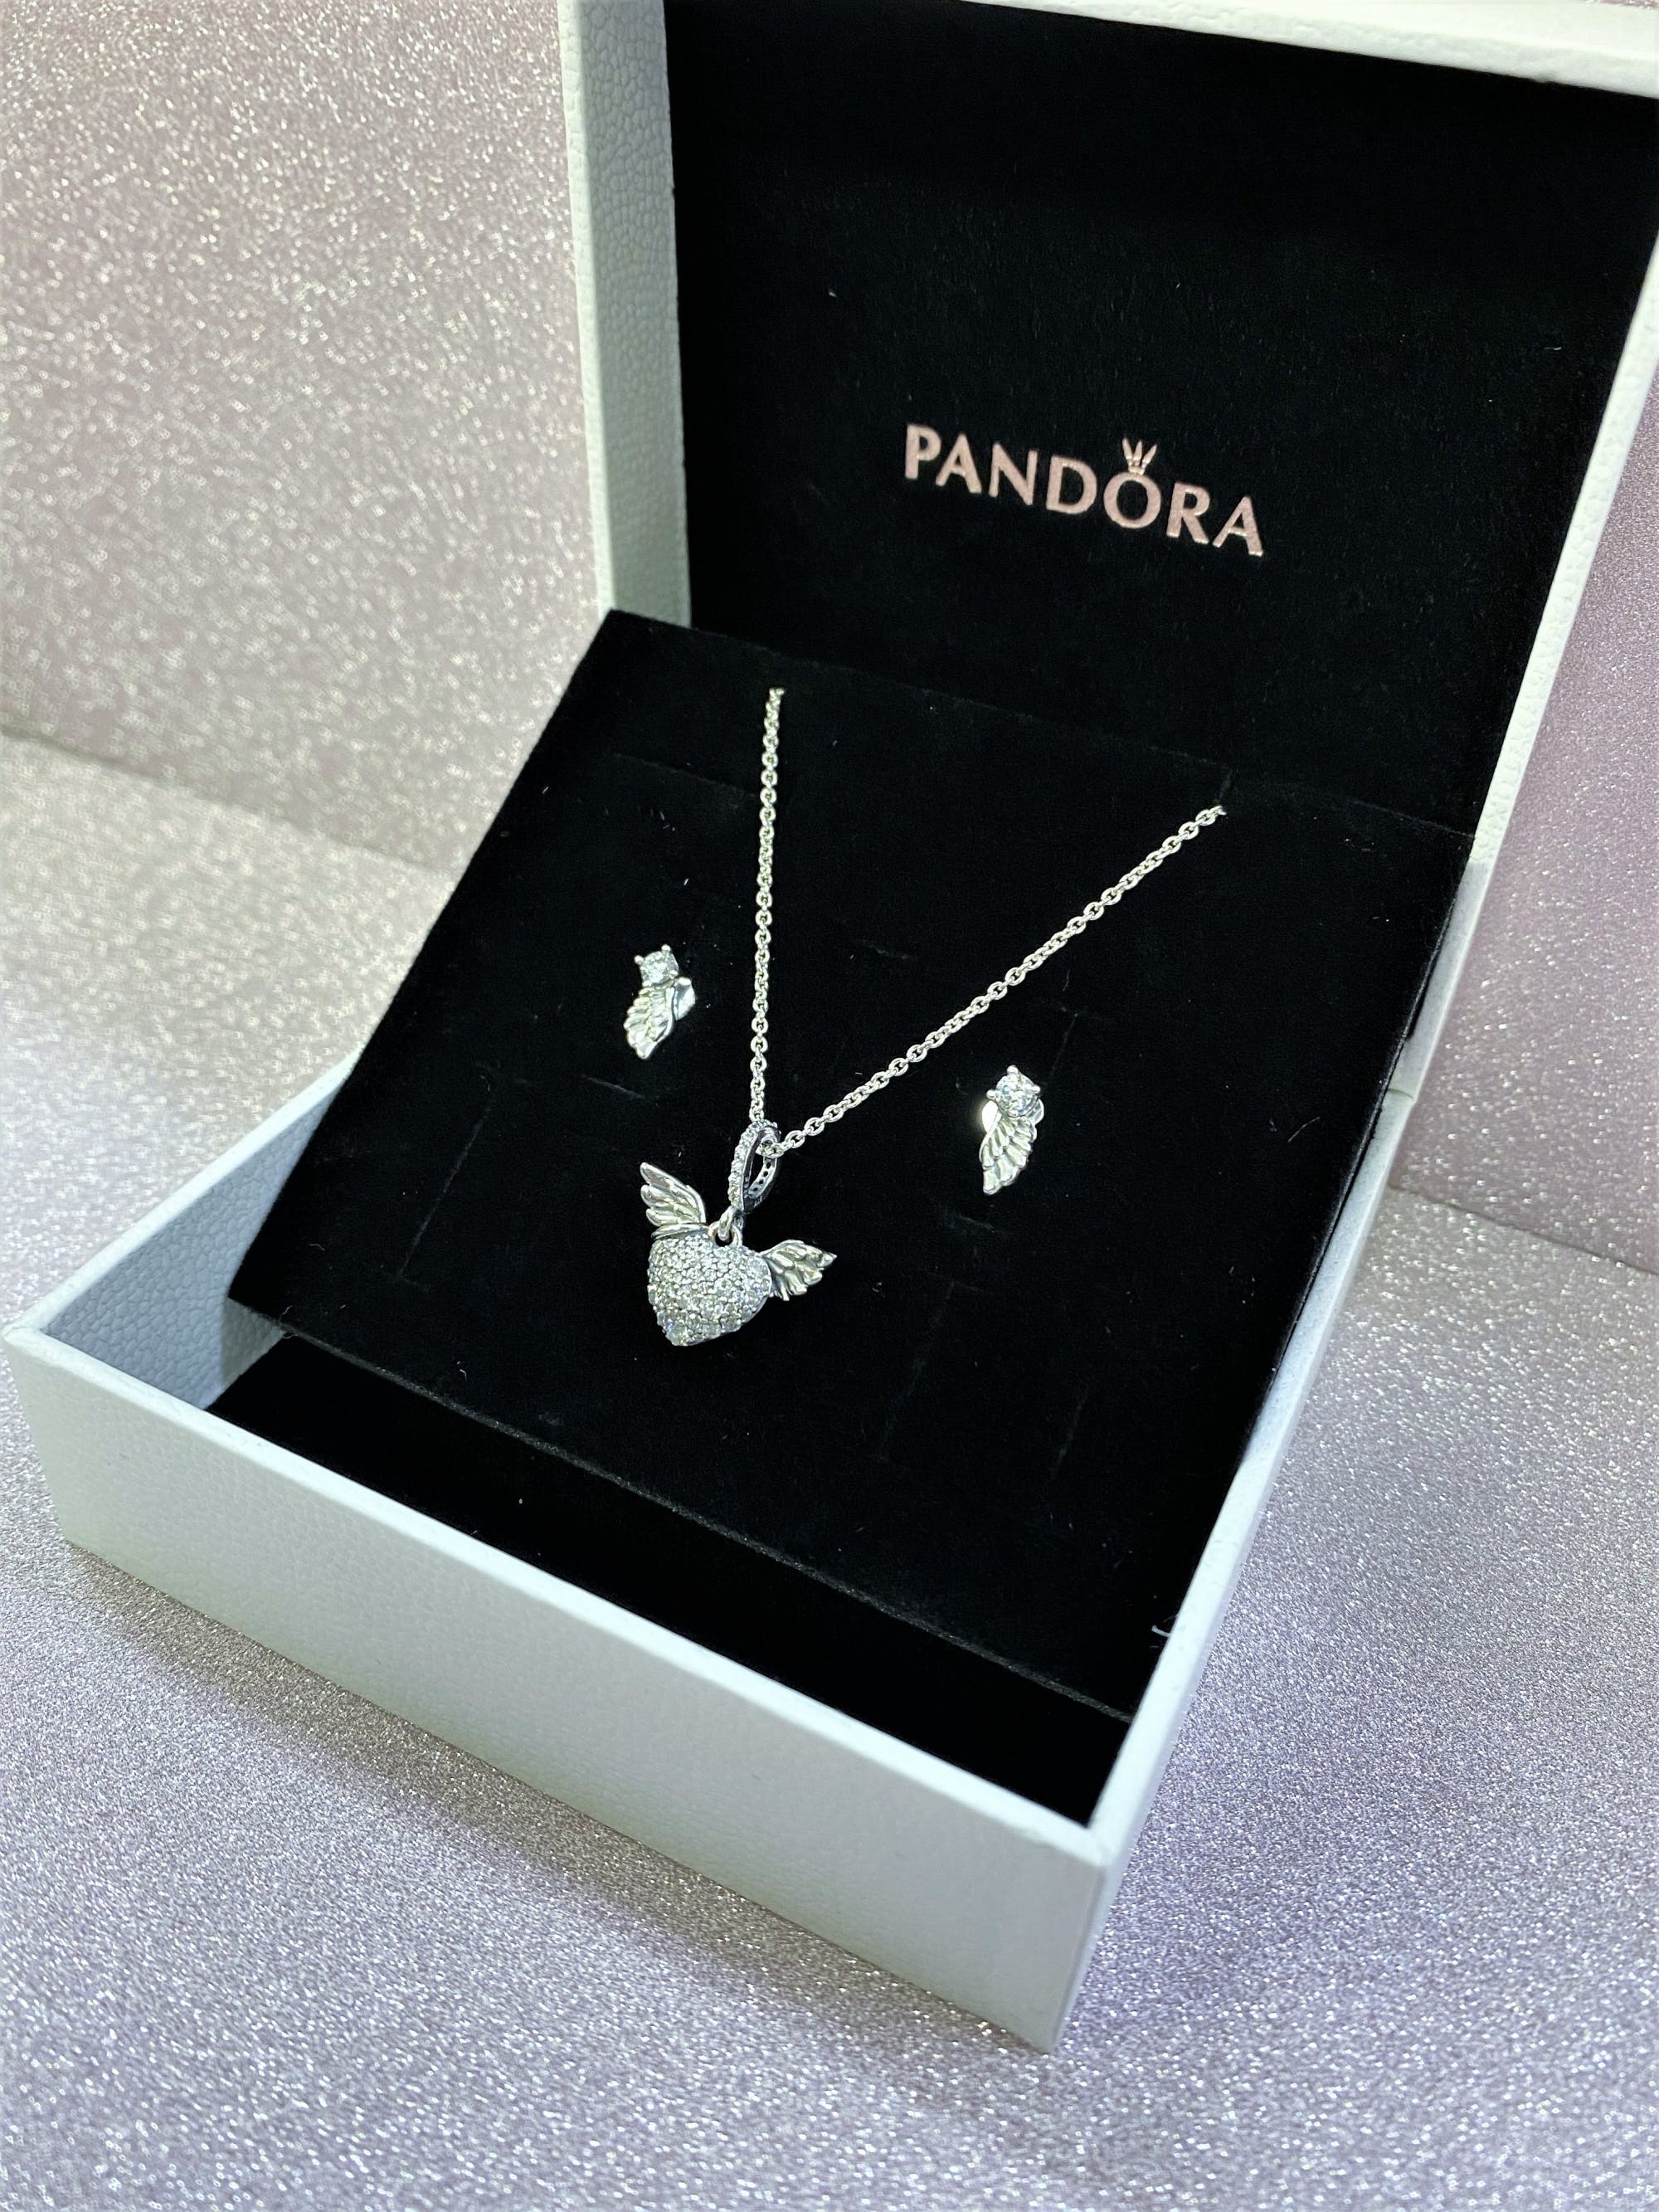 More sparkle than a star, it's the Pandora angel wing necklace and earrings set £89 (saving £21 )